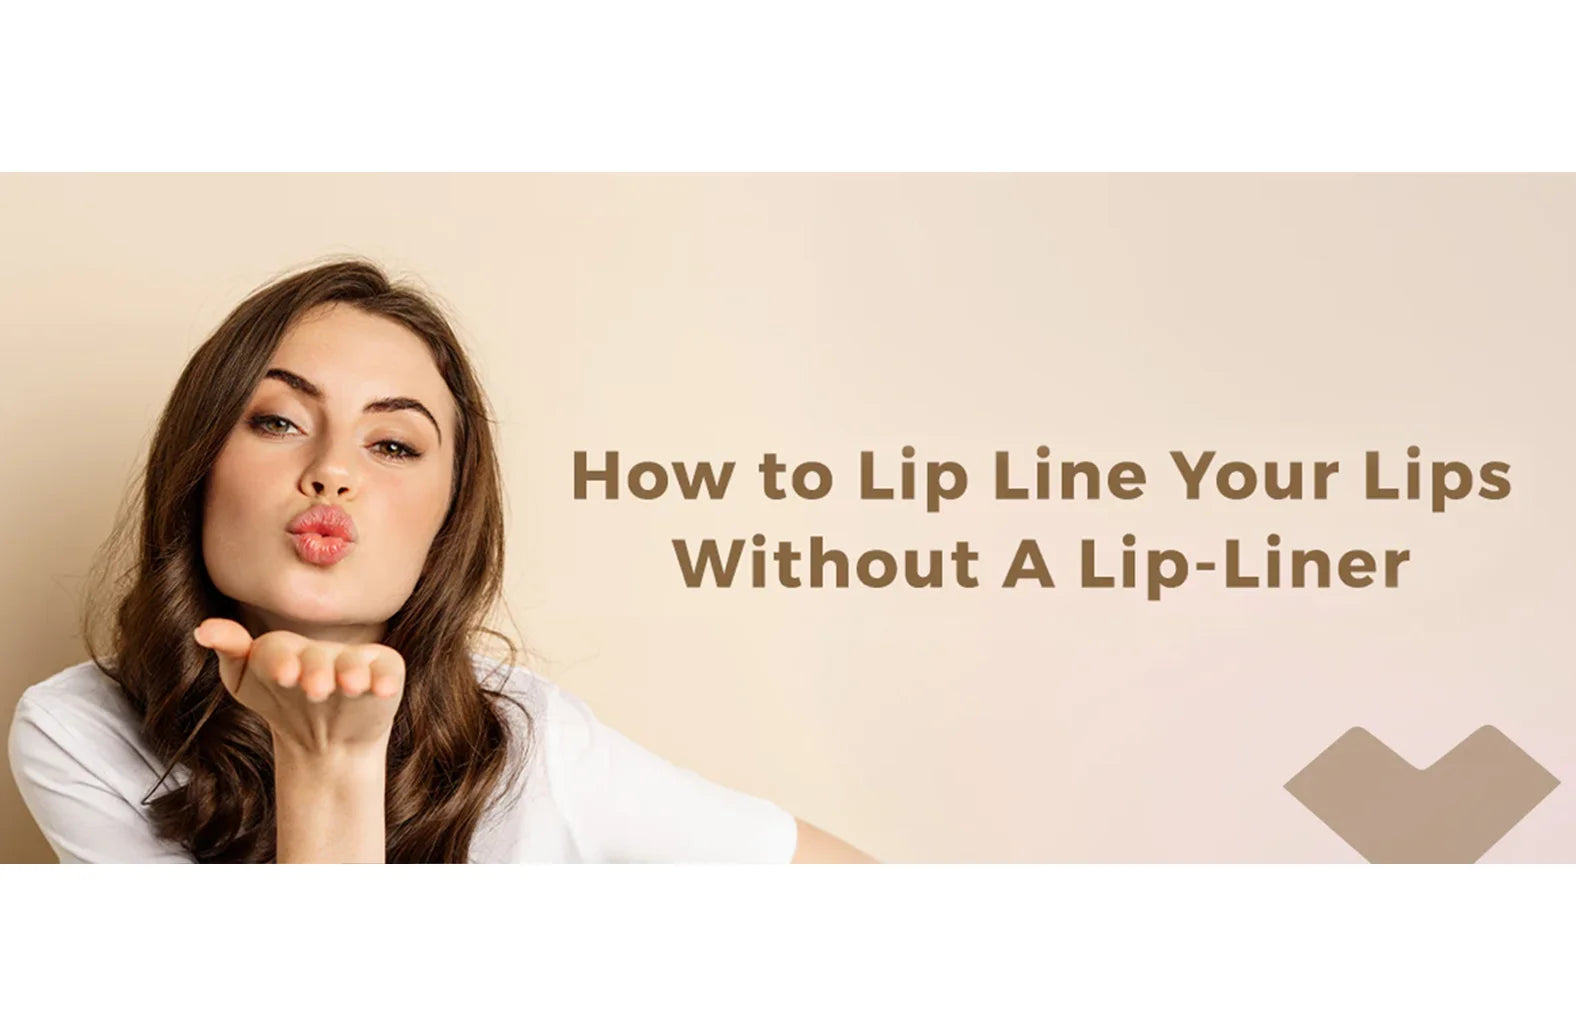 HOW-TO-LIP-LINE-YOUR-LIPS-WITHOUT-A-LIP-LINER